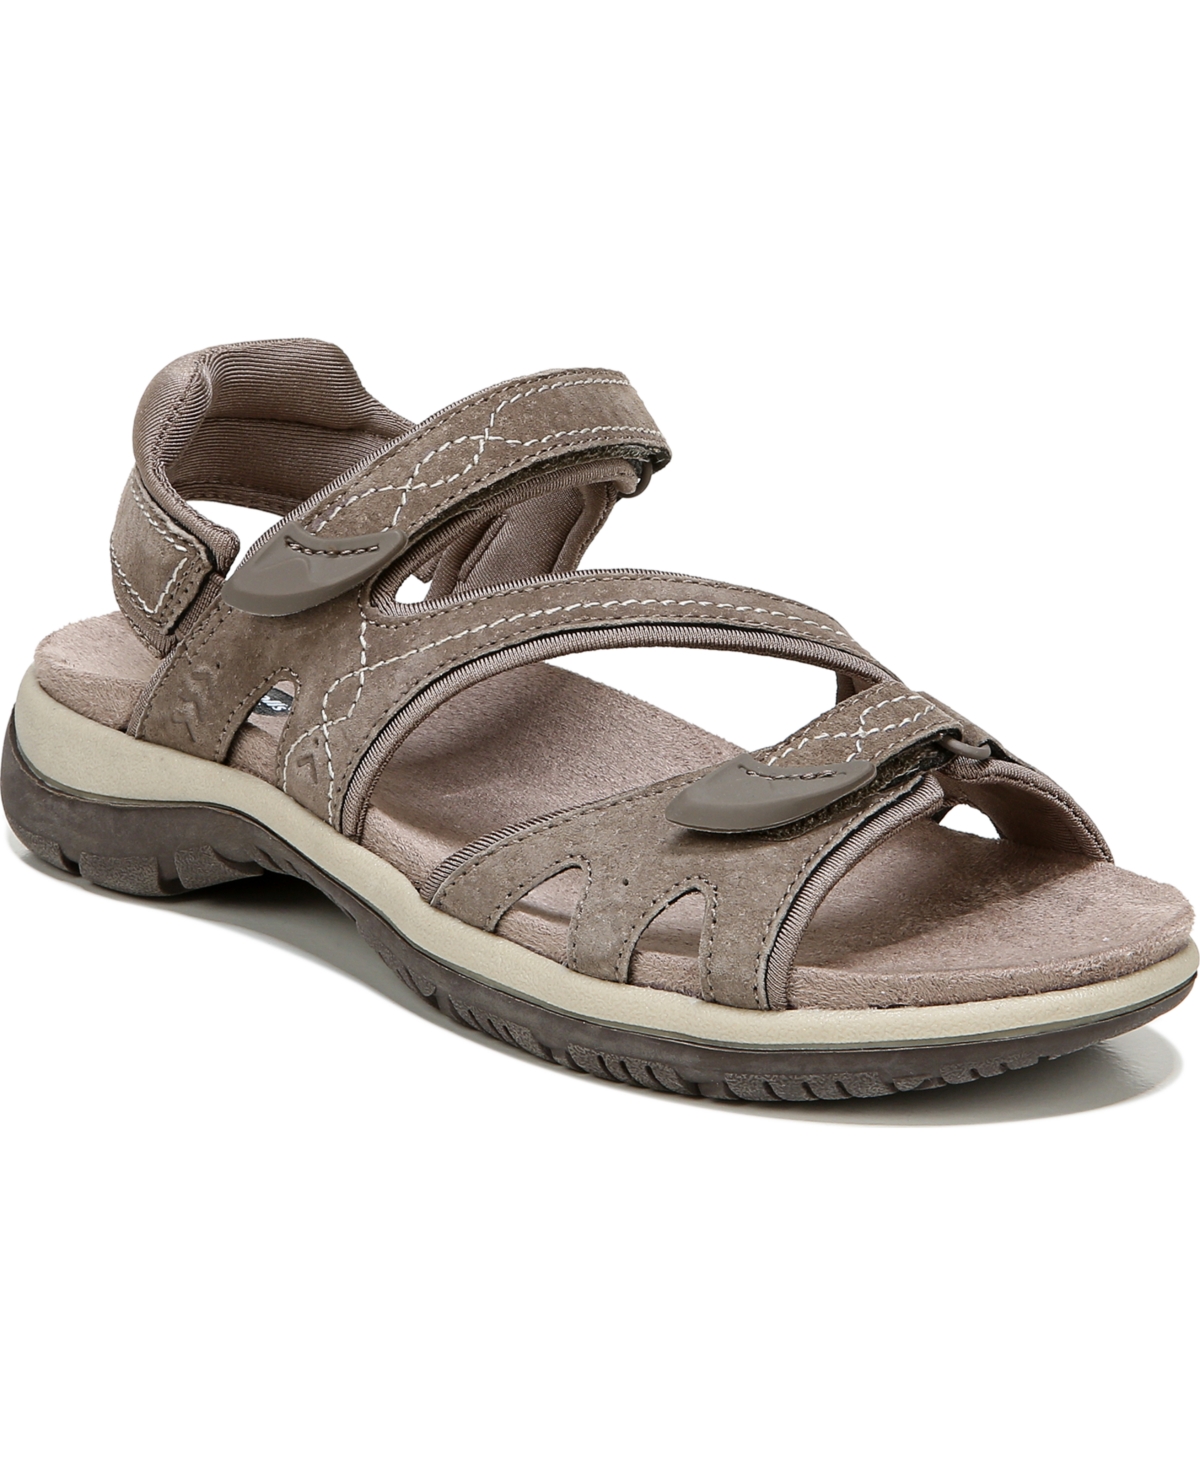 Women's Adelle Ankle Strap Sandals - Malt Taupe Suede